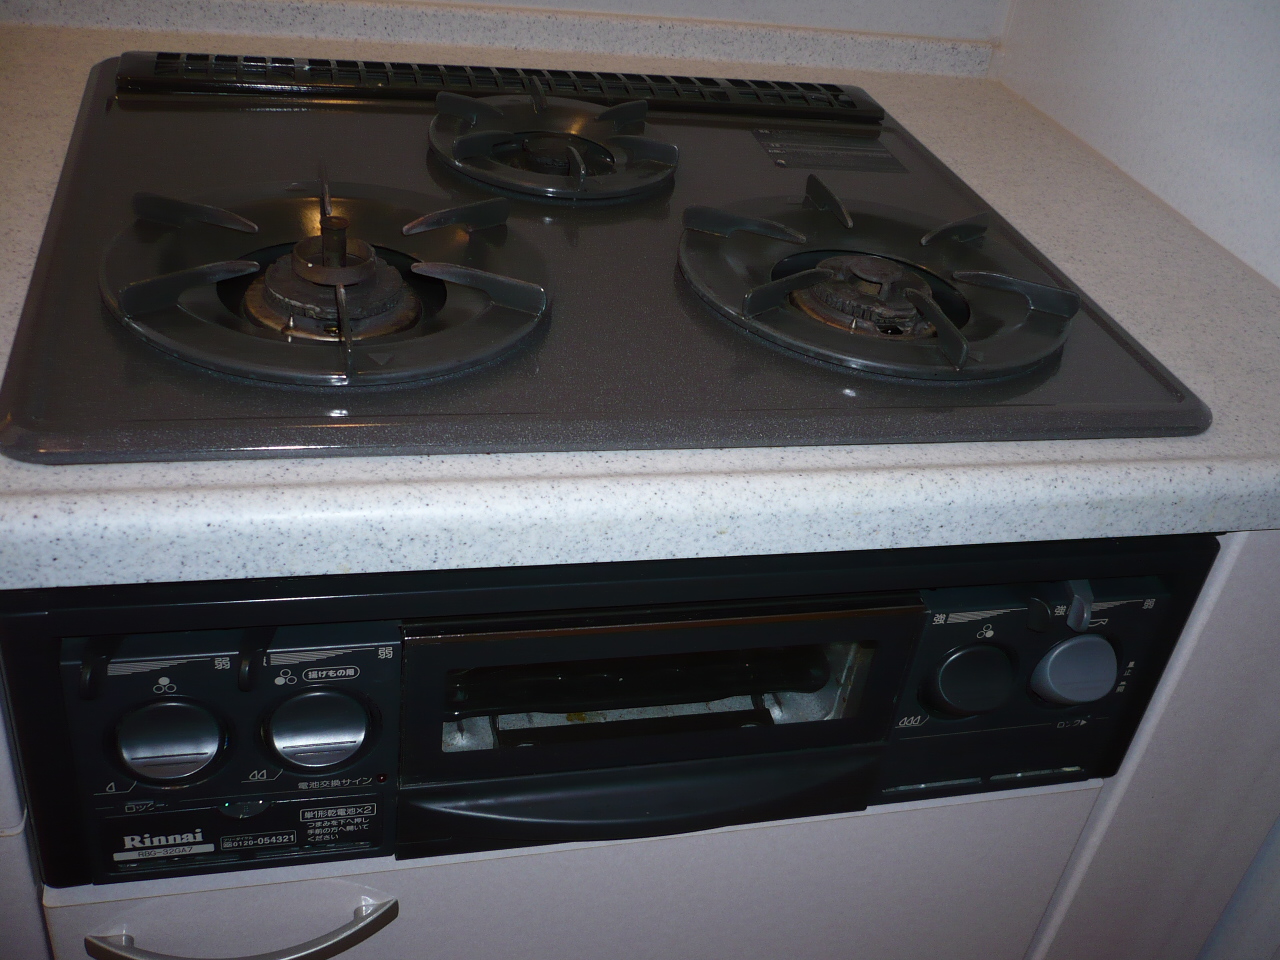 Kitchen. Two-burner stove with